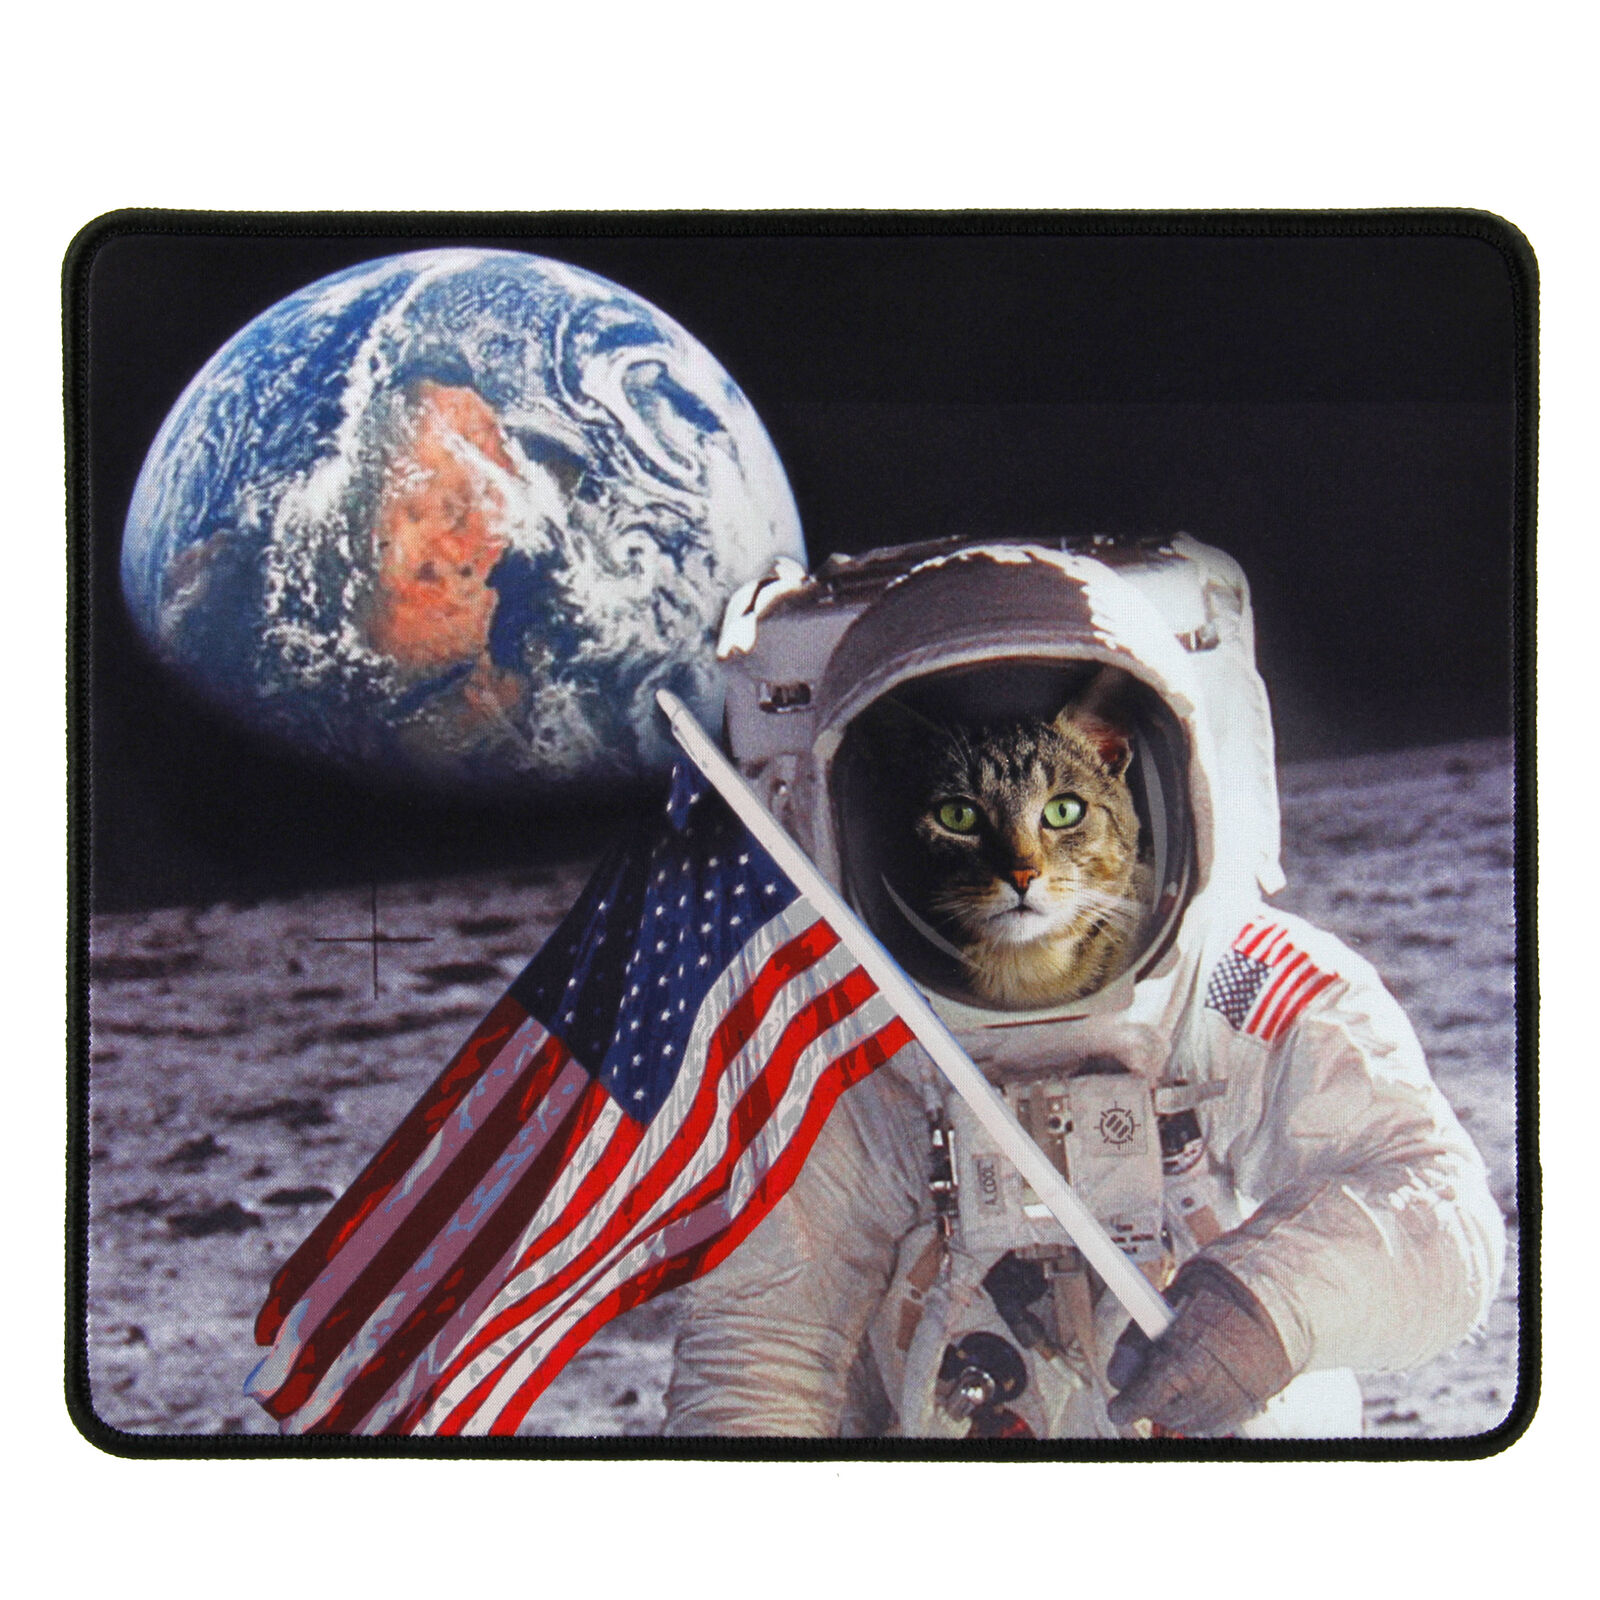 ENHANCE XL Funny Large Cat Gaming Mouse Pad with Patriotic Cat Astronaut